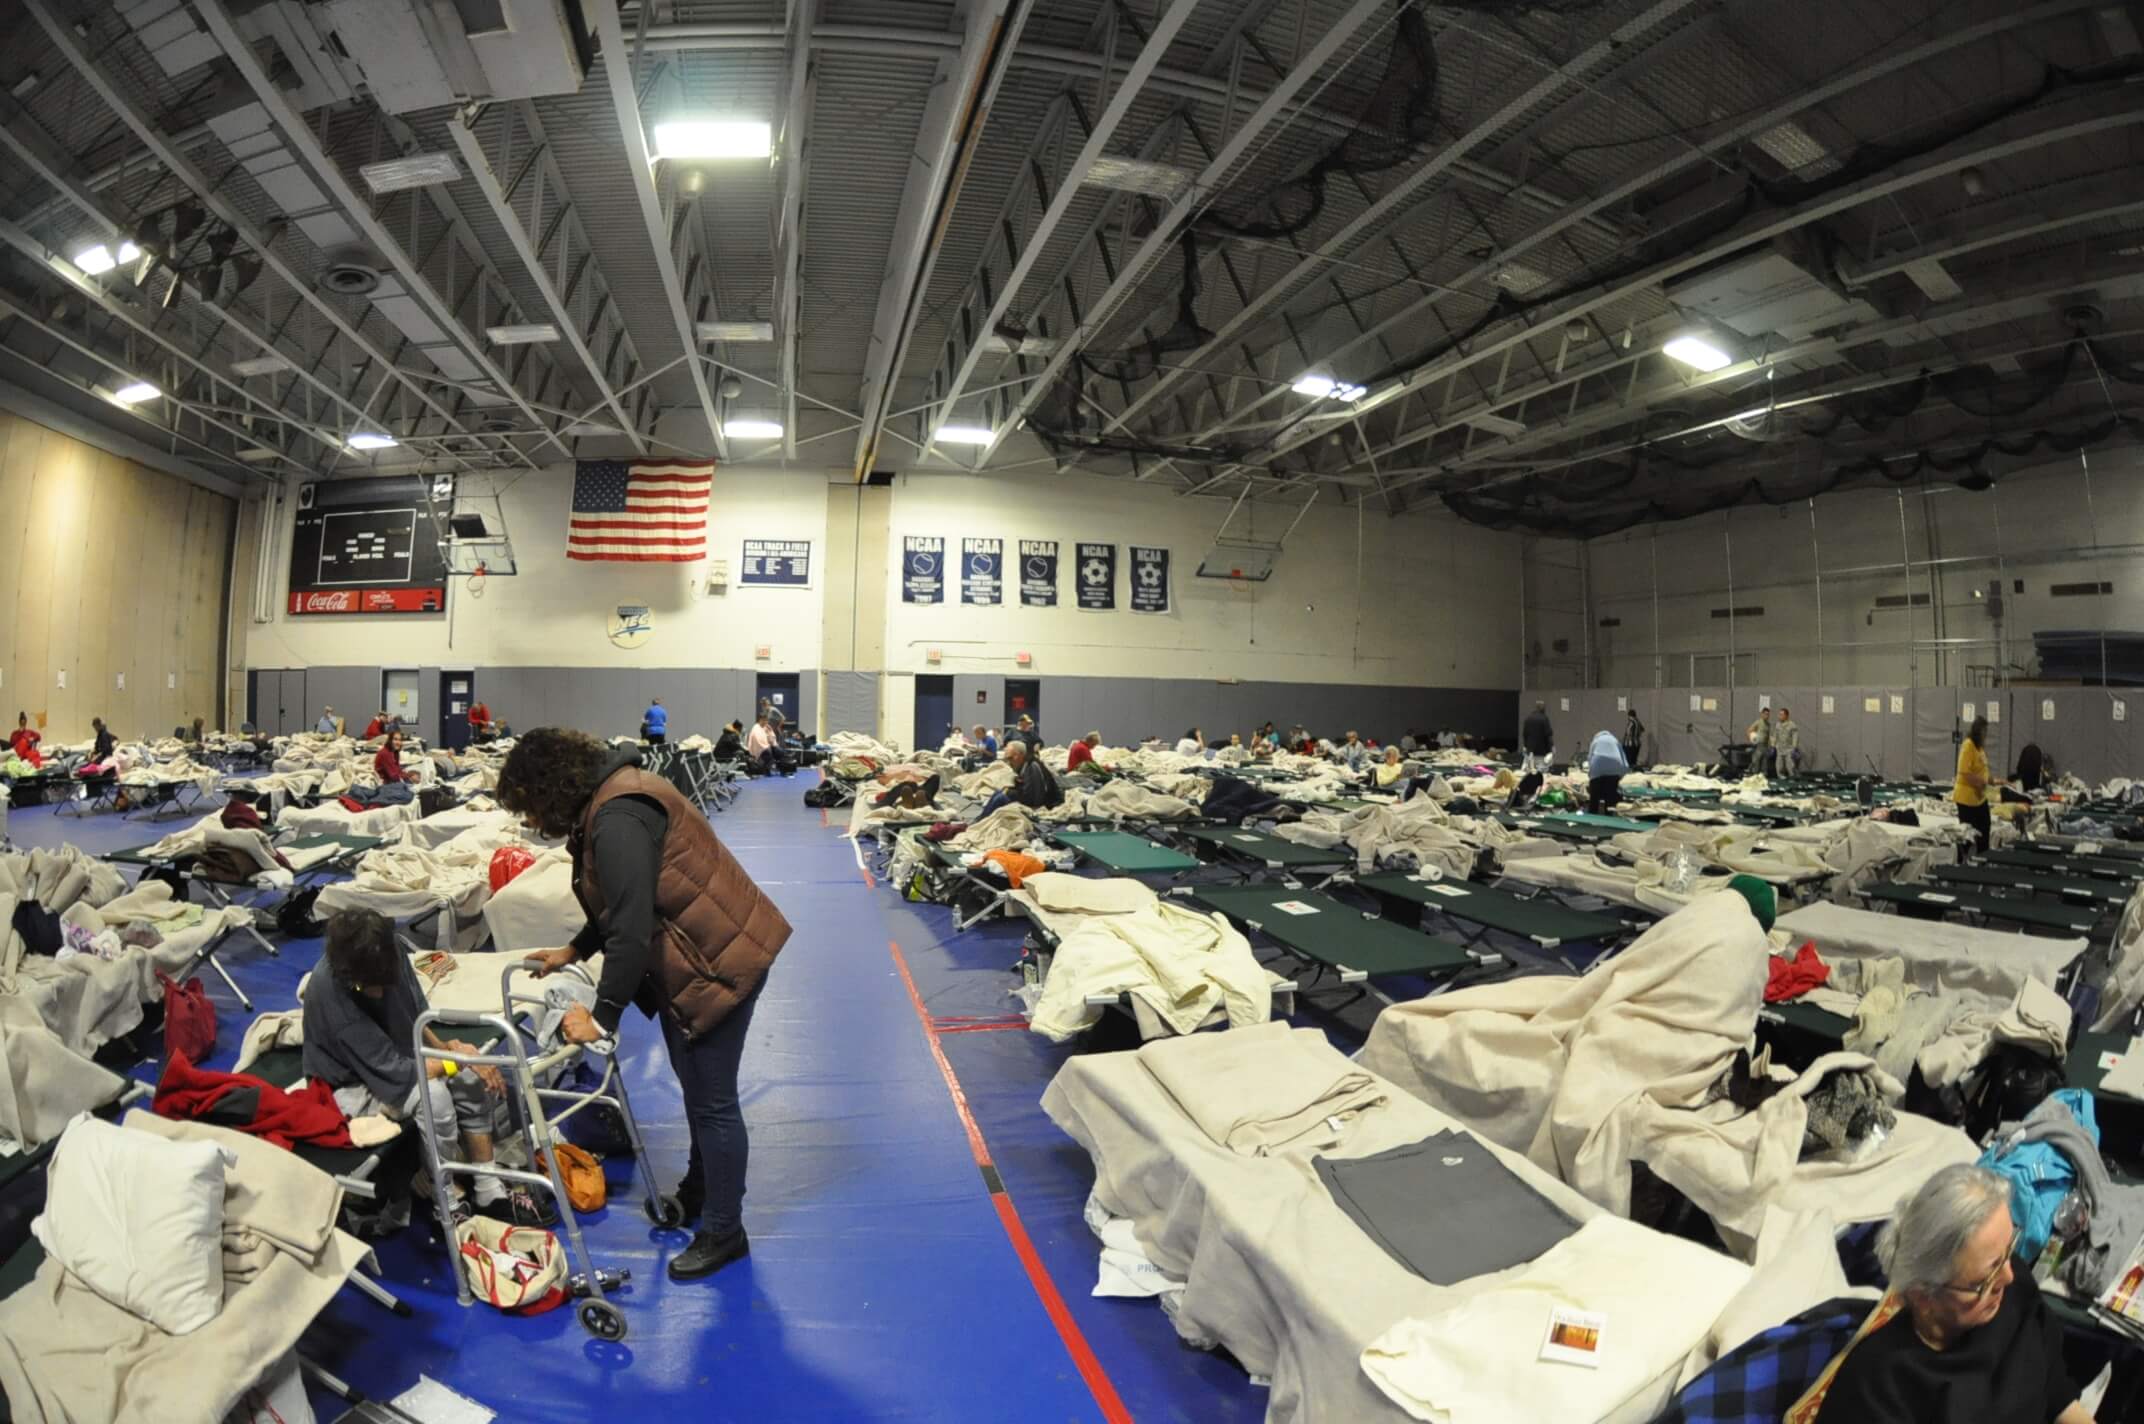 Photo of cots and people staying at the MAC during Superstorm Sandy